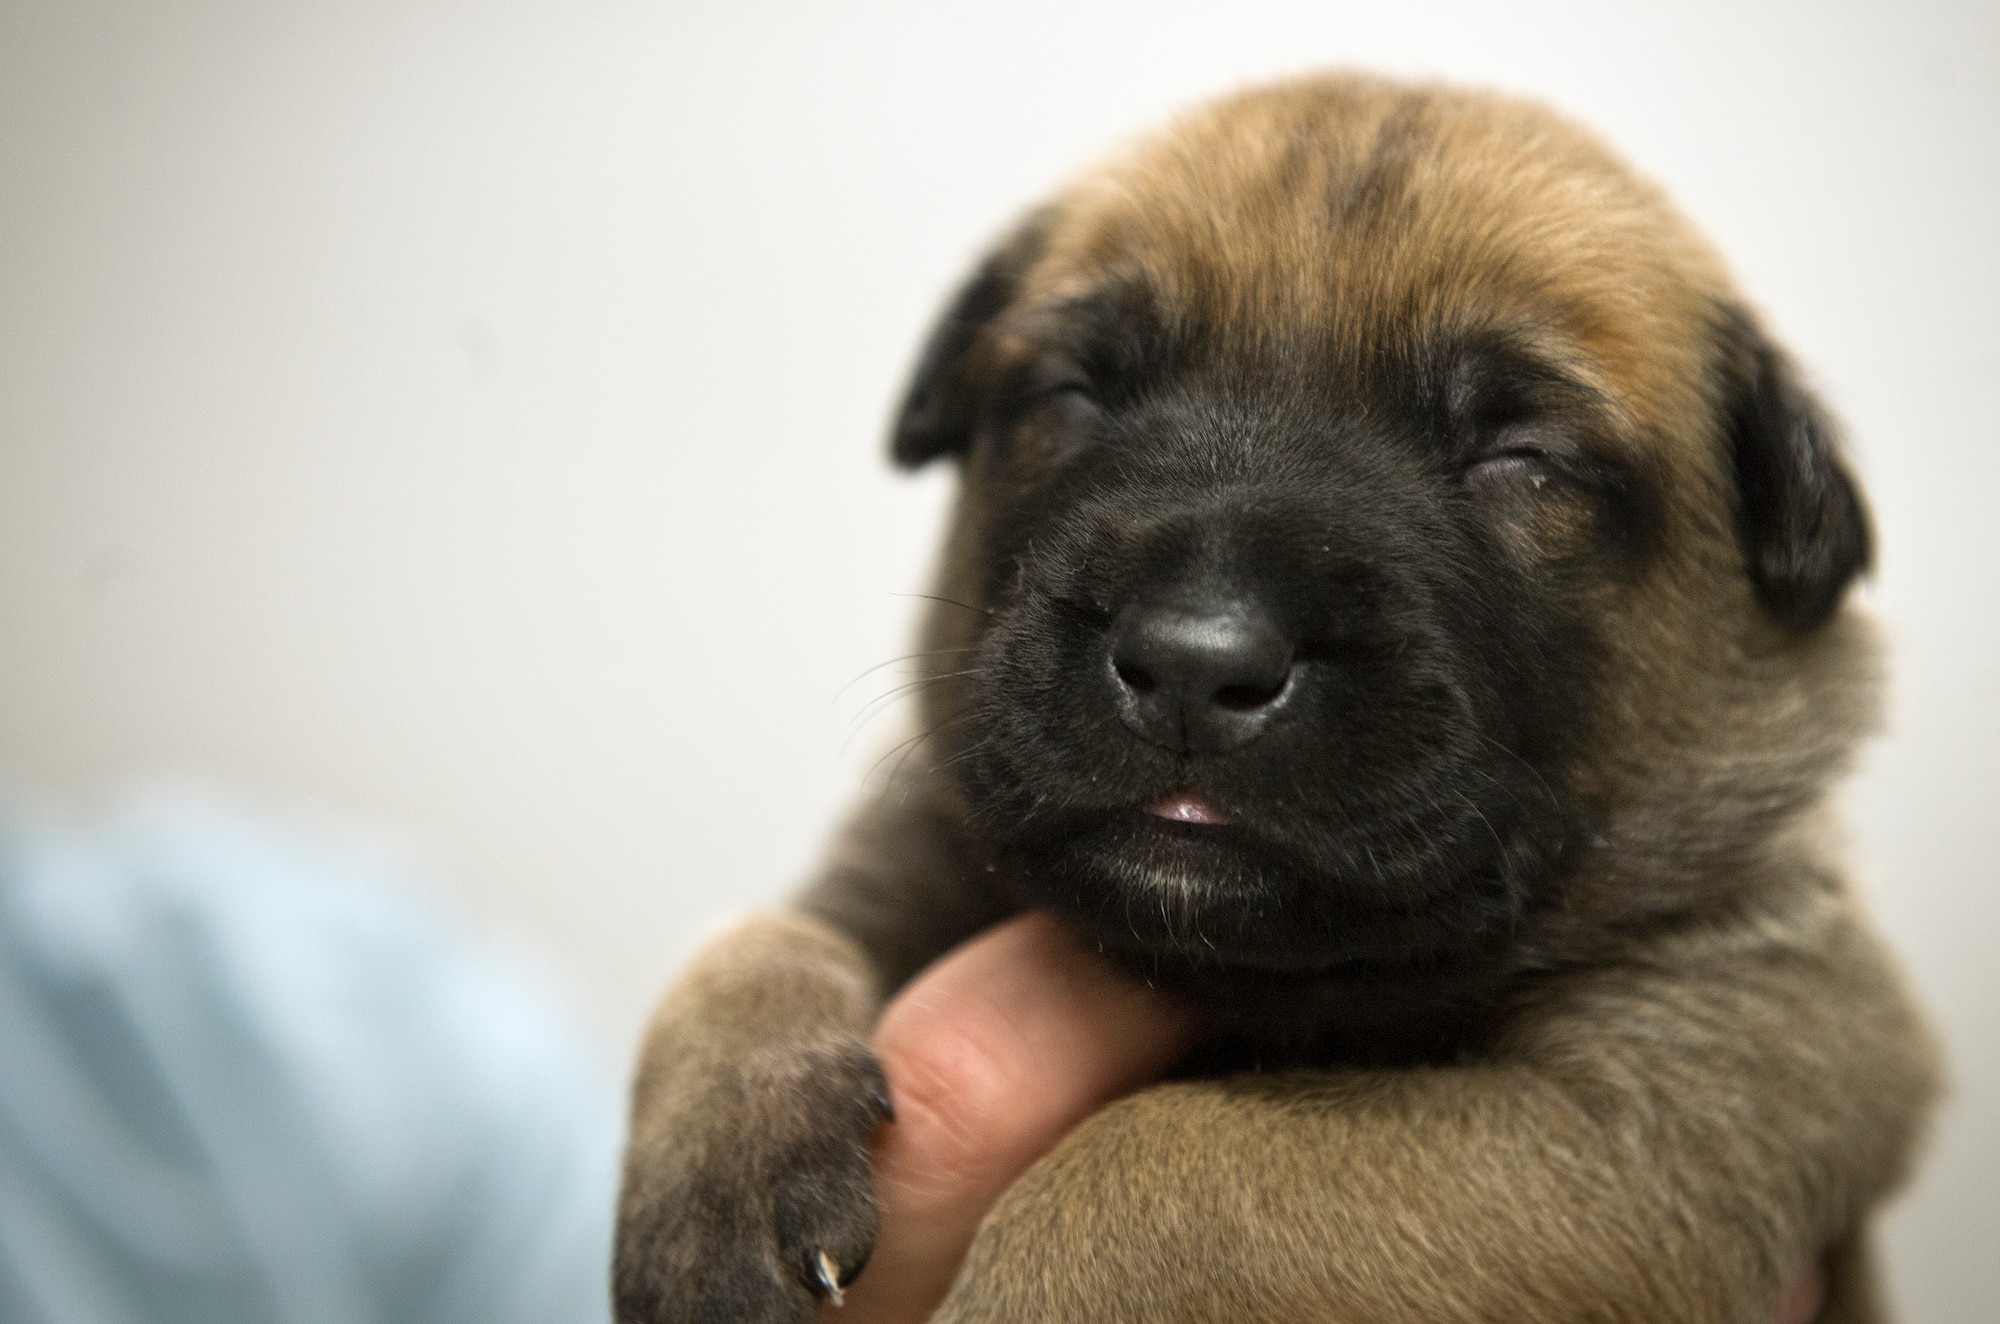 UUkita, a military working dog with the 802nd Security Forces Squadron, gave birth to eight puppies at Joint Base San Antonio-Lackland, Texas. The puppies will be kept in a secure location to prevent sickness before training the dogs for military work. When the dogs are mature enough to train, they will filter through a selection process to determine which dogs are qualified for military work. (U.S. Air force photo/Staff Sgt. Vernon Young Jr.)